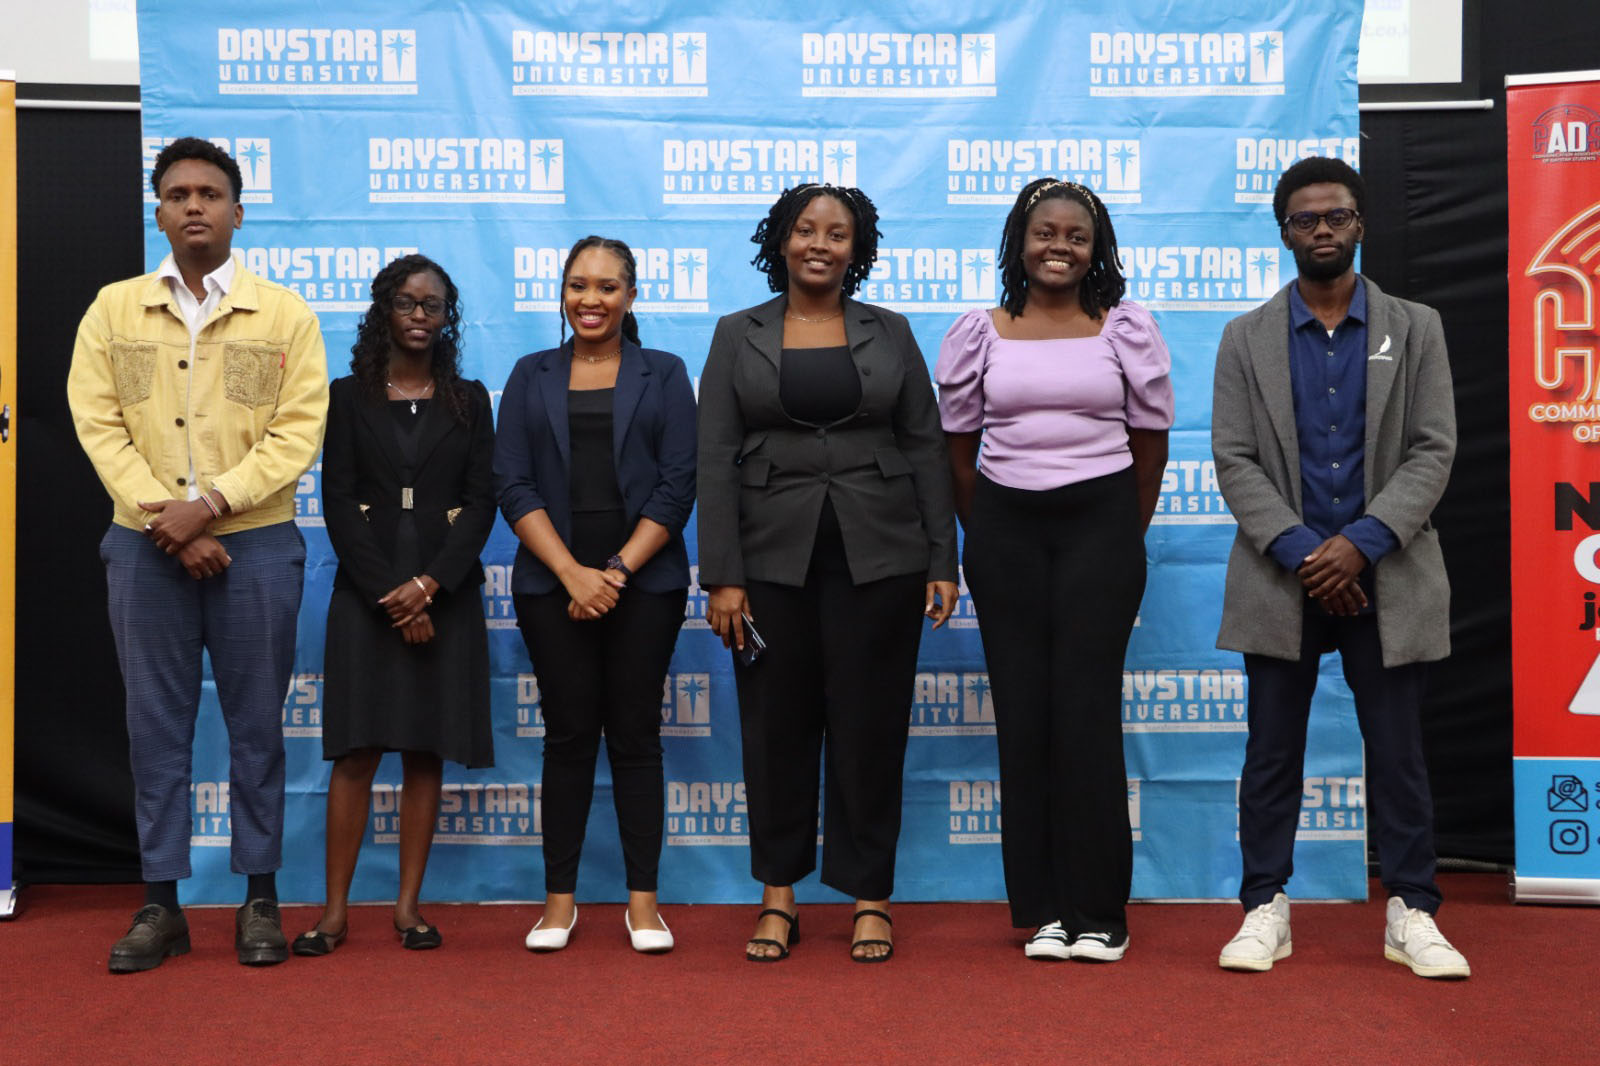 L-R: Shadrack Righa - Programming Manager, Tracy Mutheu - News Manager, Esther Leipa Nalotwesha - Assistant Station Manager, Delphine Mutinda - Station Manager, Victoria Momanyi - Corporate Affairs Manager, Maingi Mutiso - Production Manager